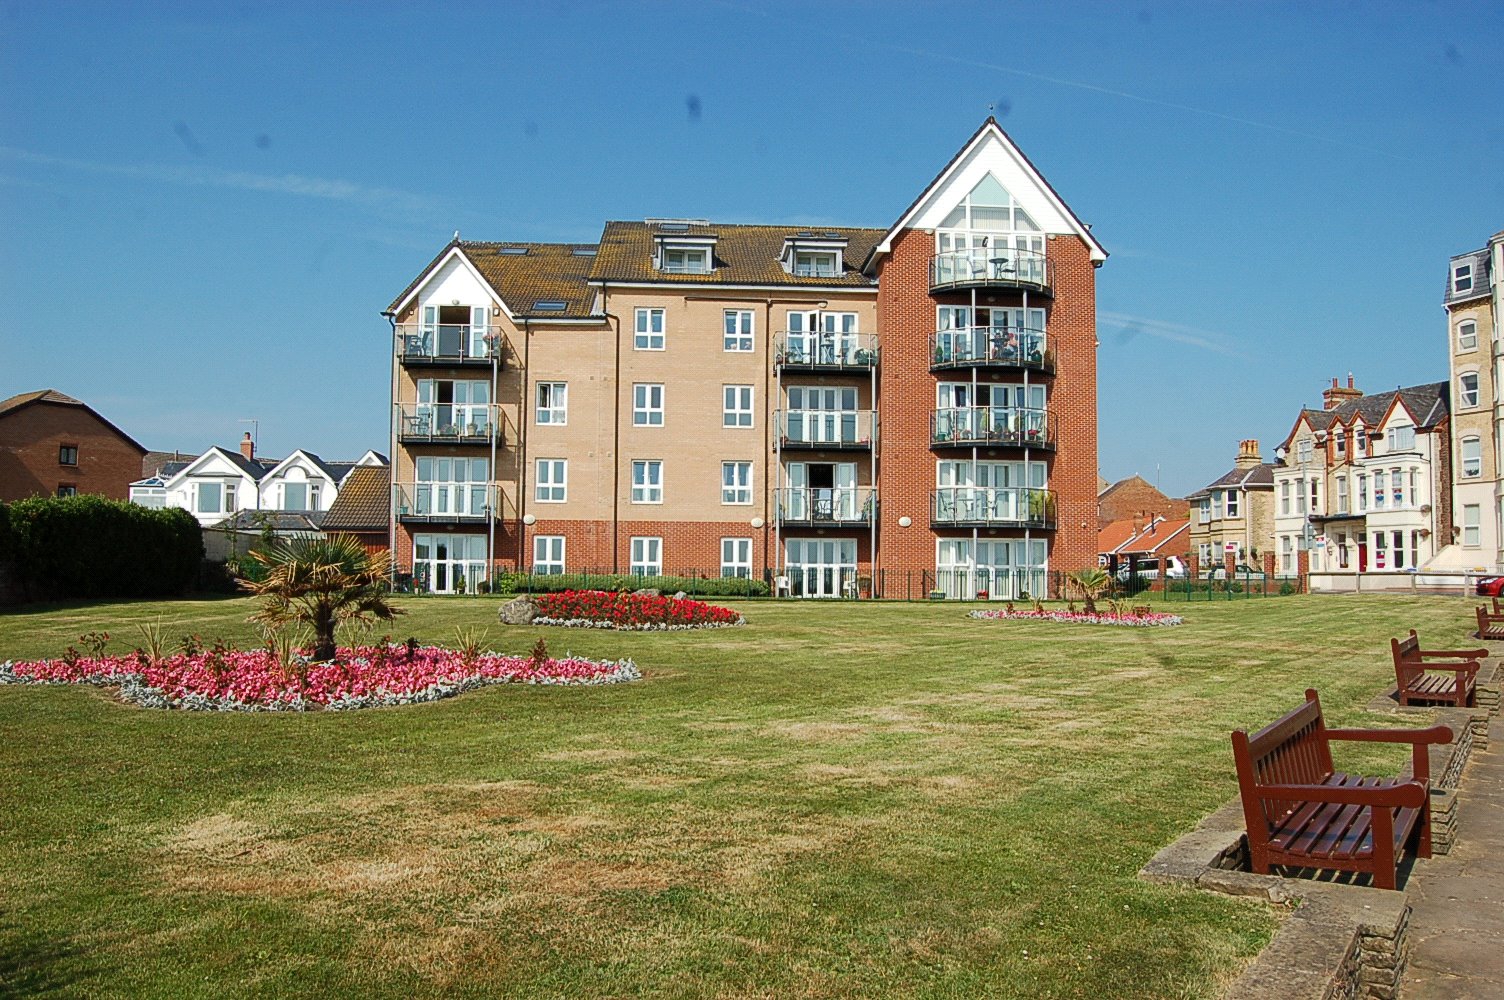 2 bed apartment for sale in St. Annes Road, Bridlington - Property Image 1